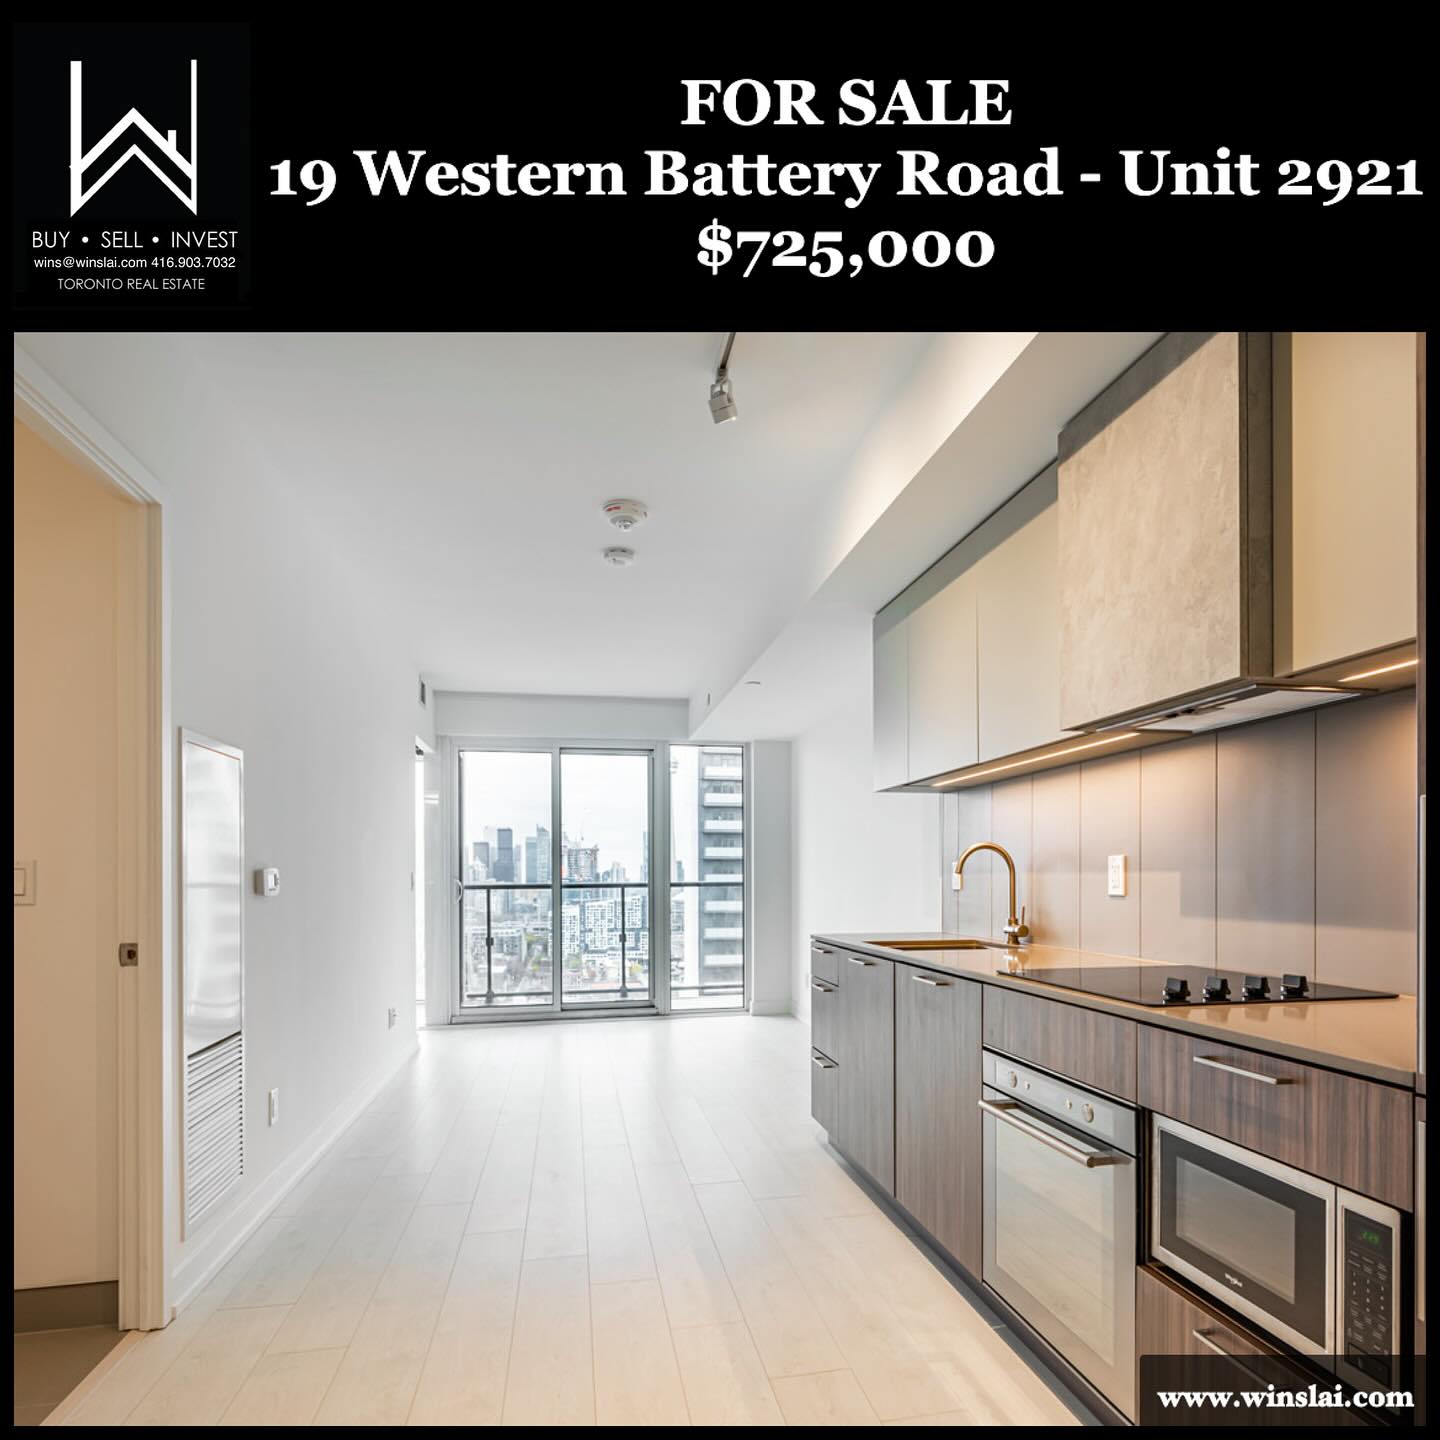 For sale flyer for 19 Western Battery Rd Unit 2921.